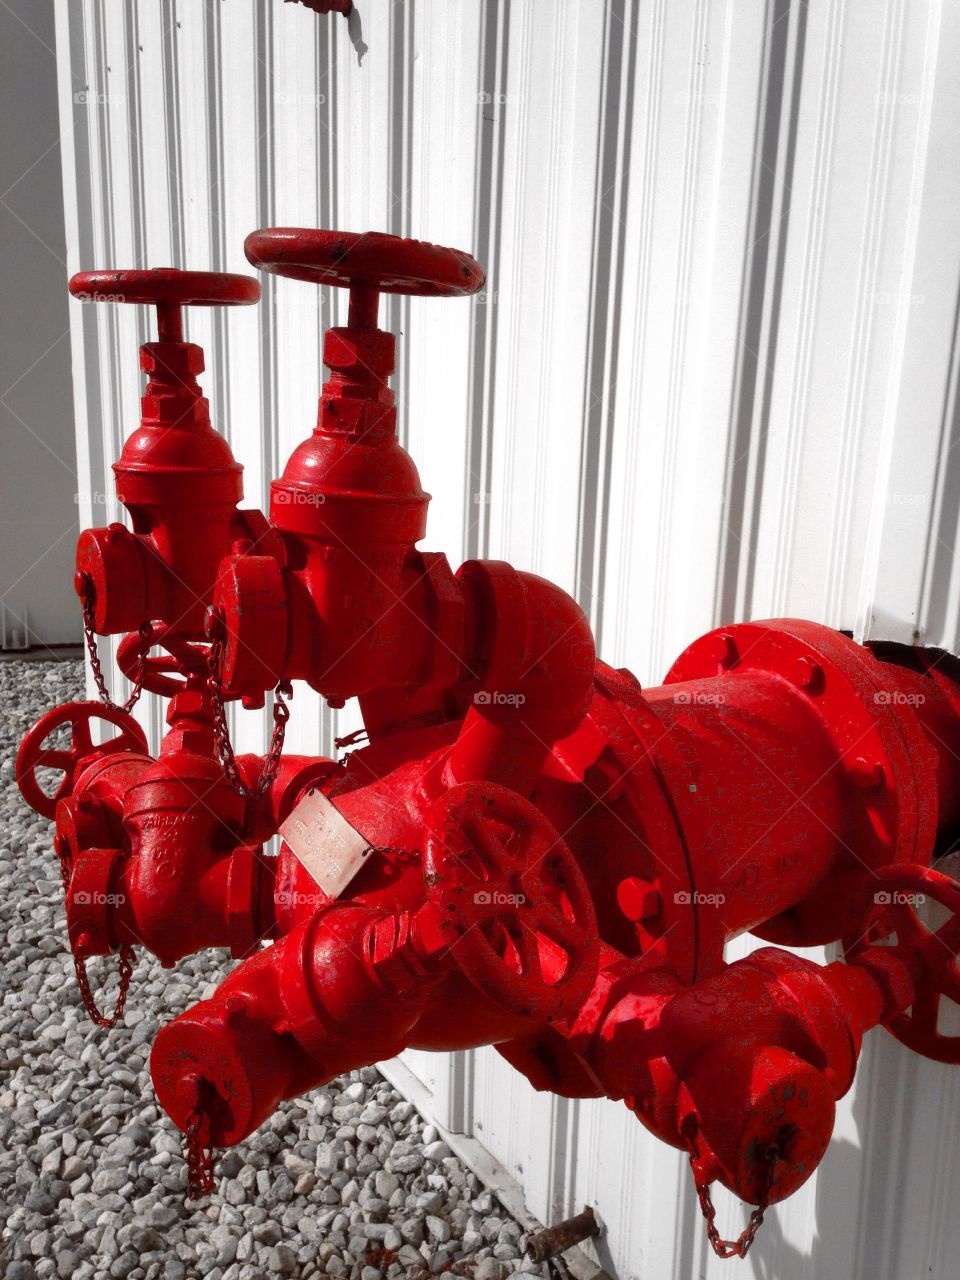 Close-up of a red industrial valve